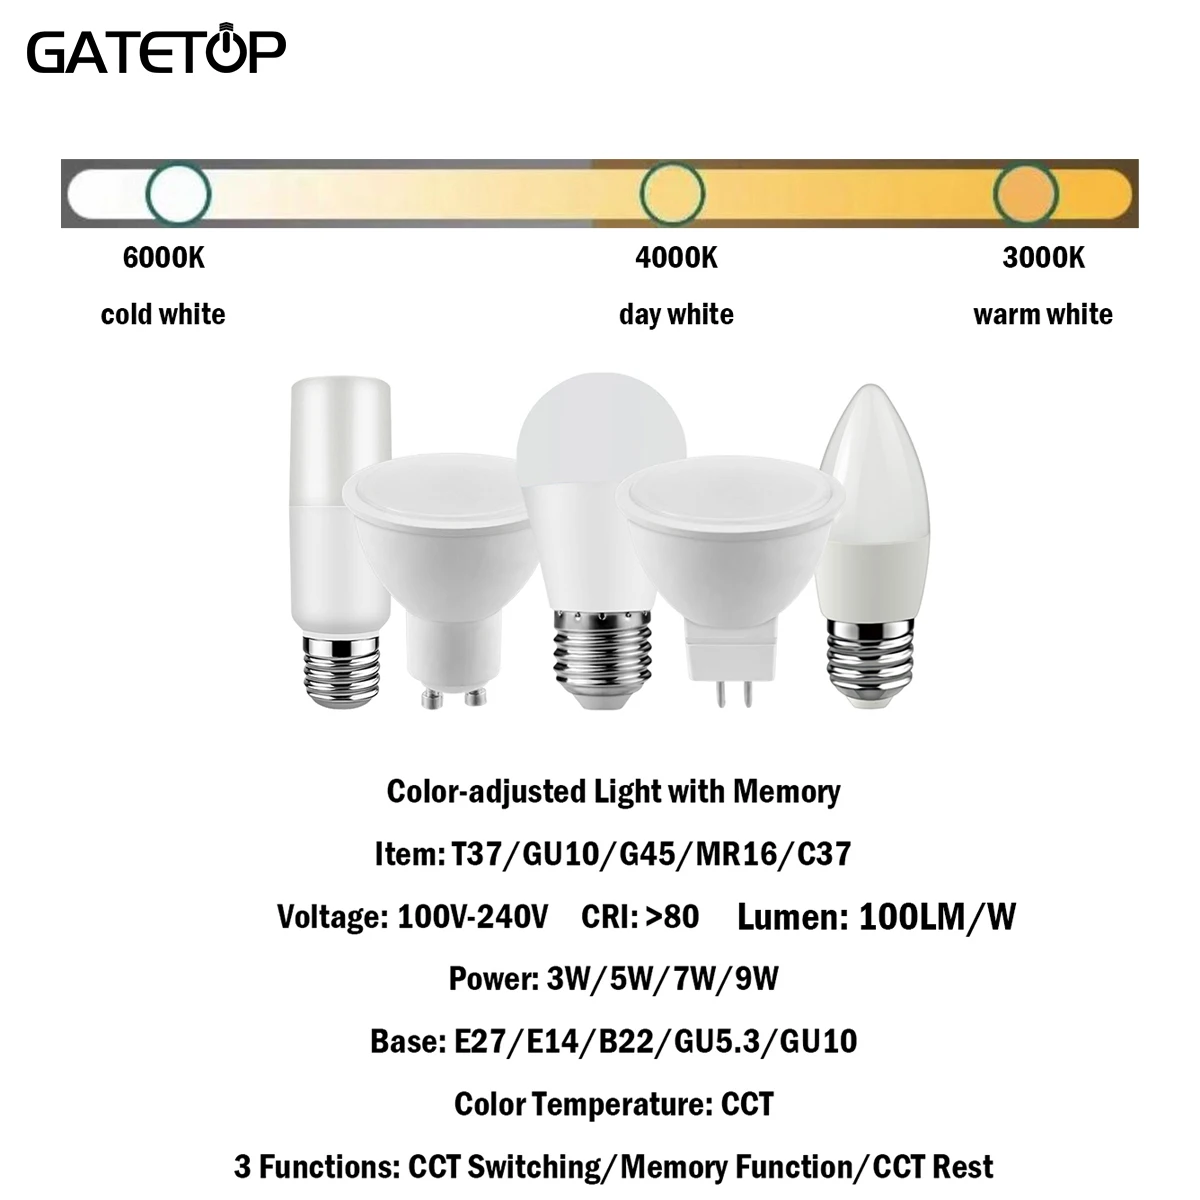 10PCS New LED Smart Light 3 Color-Adjusted with Memory 3-9W 100-240V GU10/MR16/C37/T37/G45 No Strobe 3 Functions for Home Office